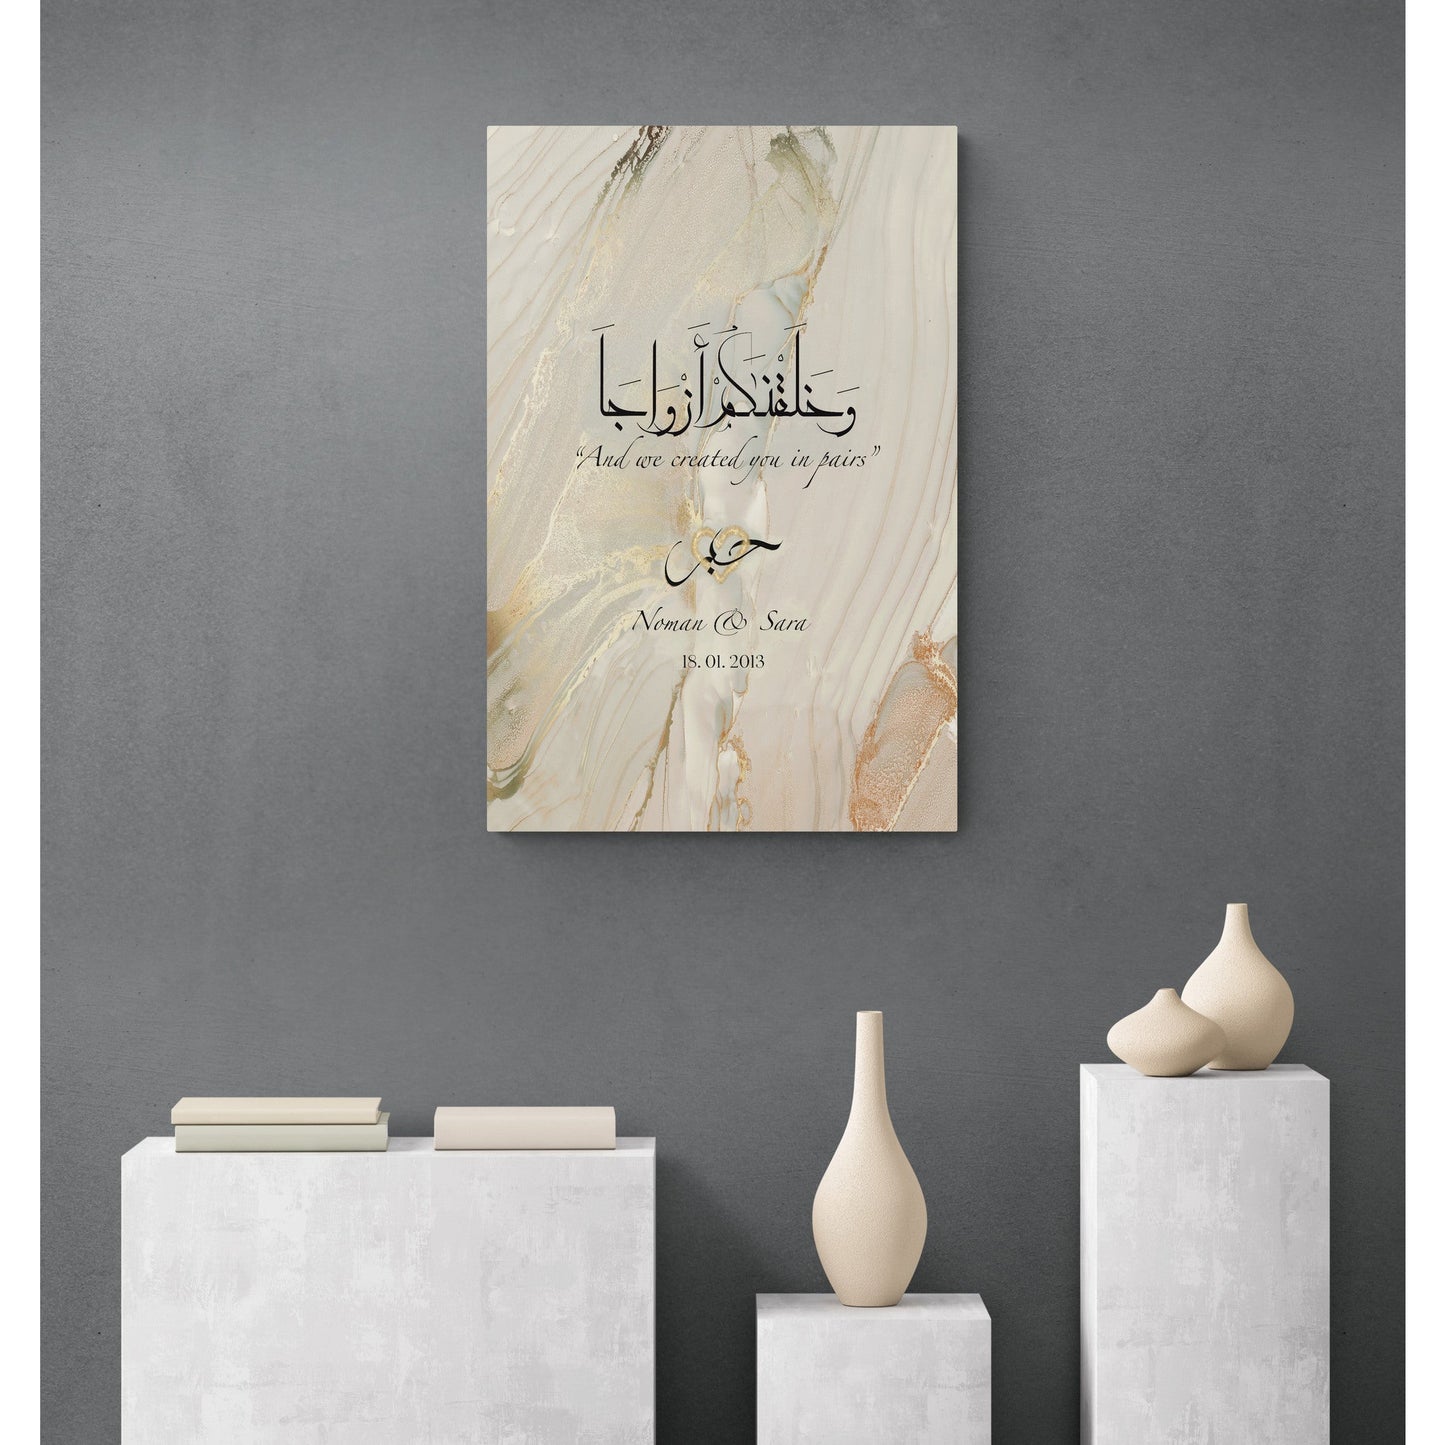 Personalisable Islamic Art Gift for Couples: "Eternal Rose" Canvas